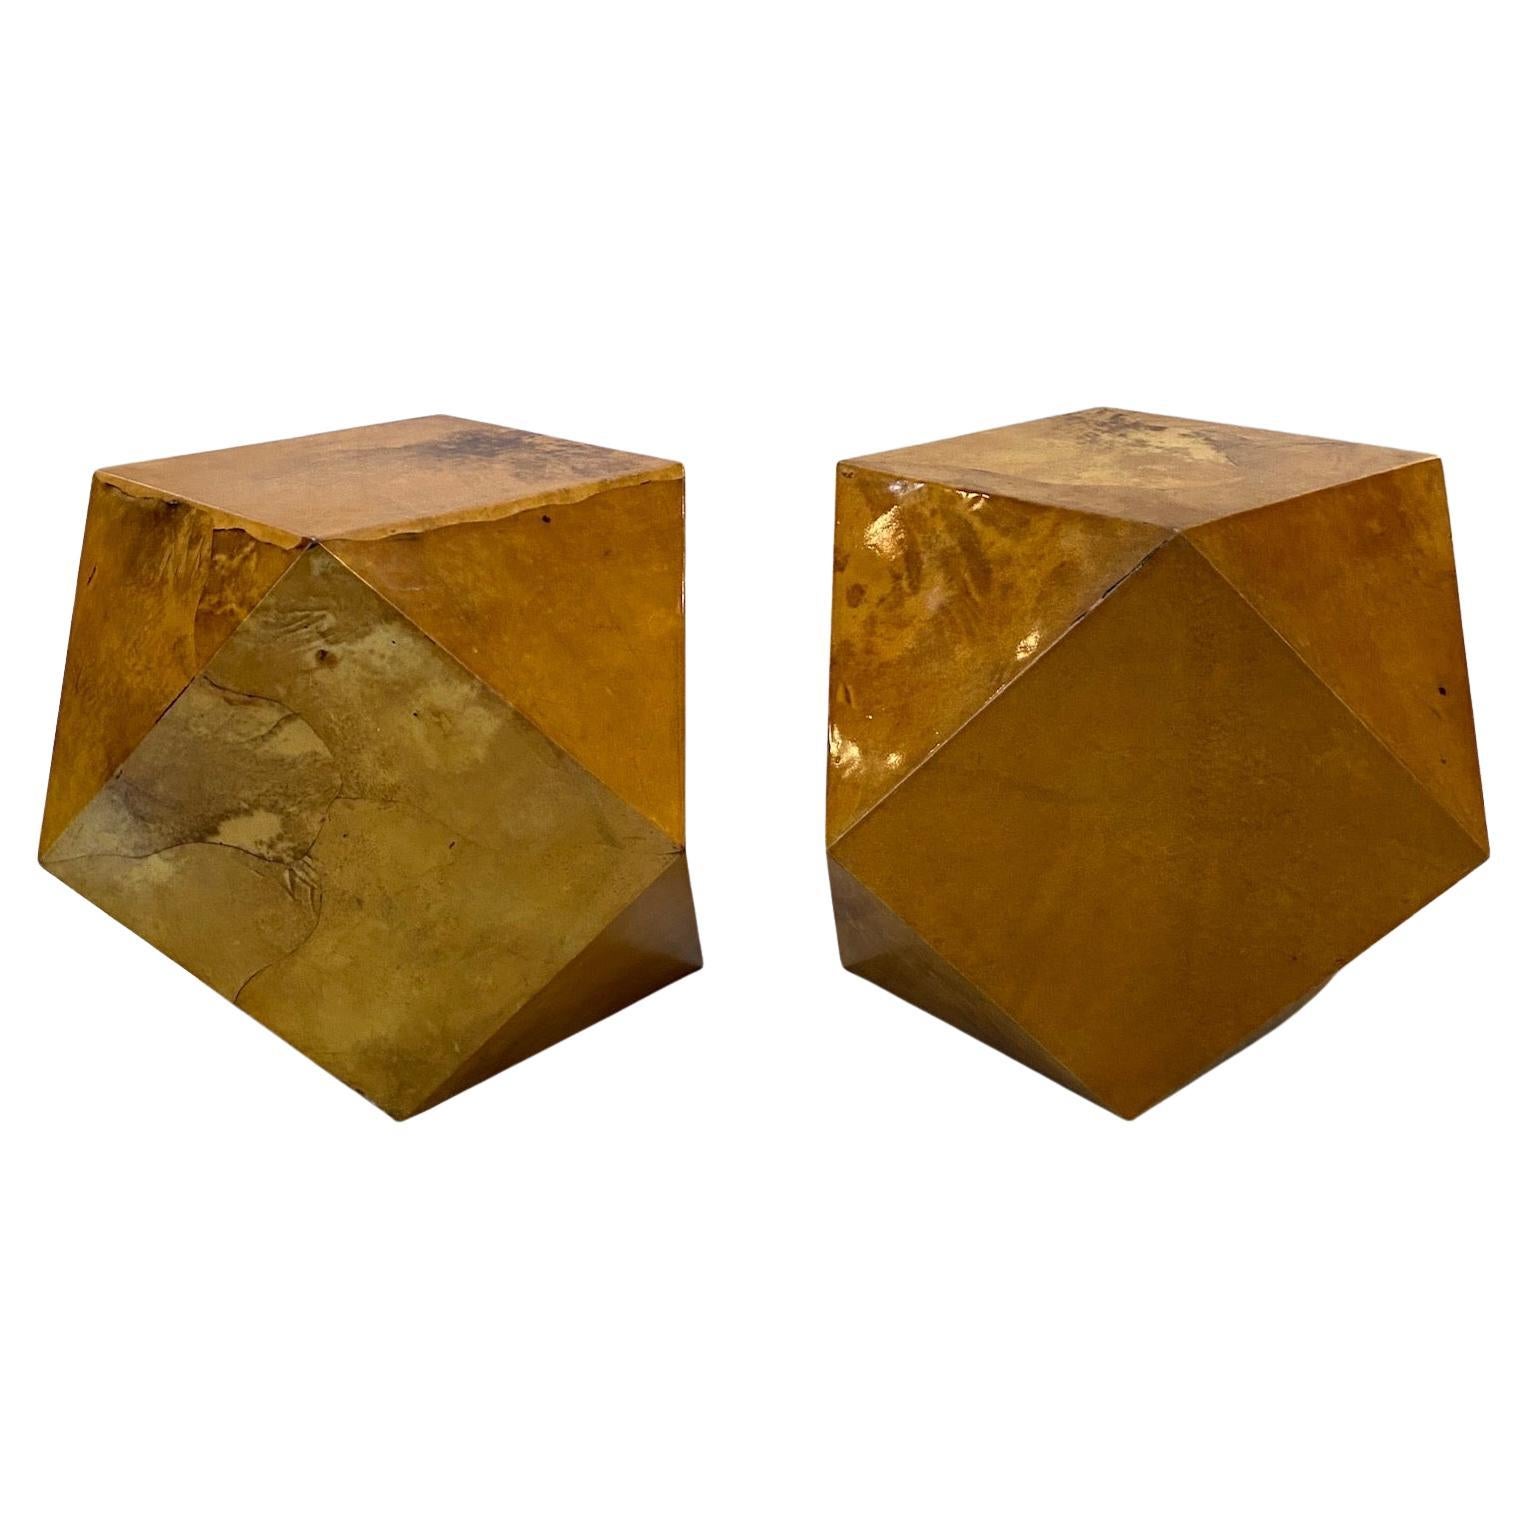 Karl Springer design… Rare polyhedron tables covered in natural goat skin… 14 sides consisting of triangles and squares… Included in the photos is the original Maquet and mock up for these tables...Exceptional quality authenticated by Tom Langevin..